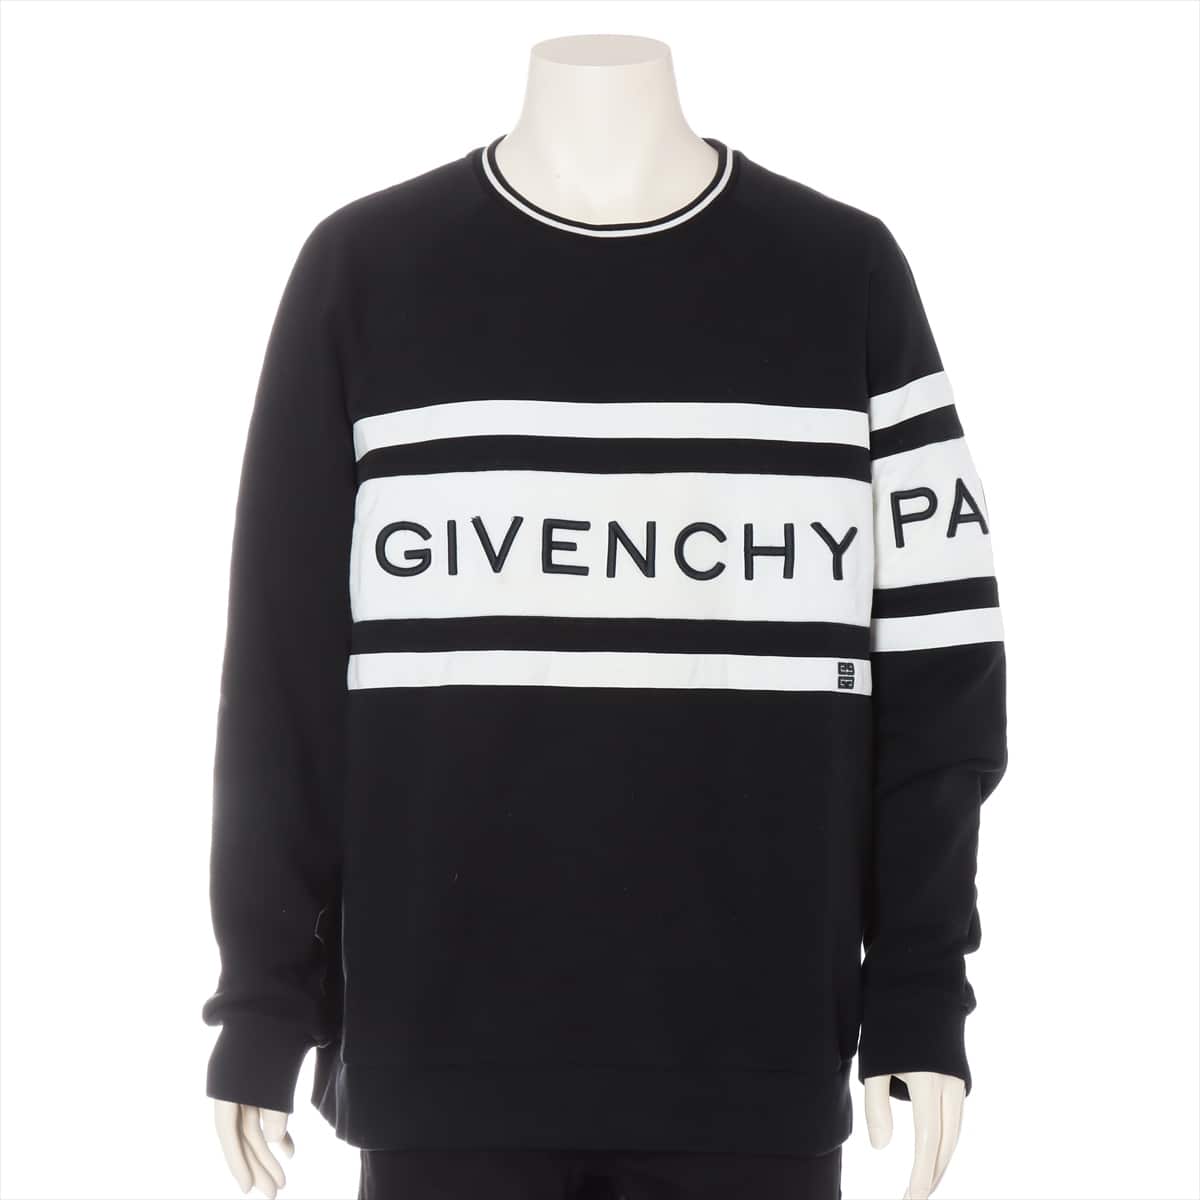 Givenchy Cotton Basic knitted fabric XL Men's Black